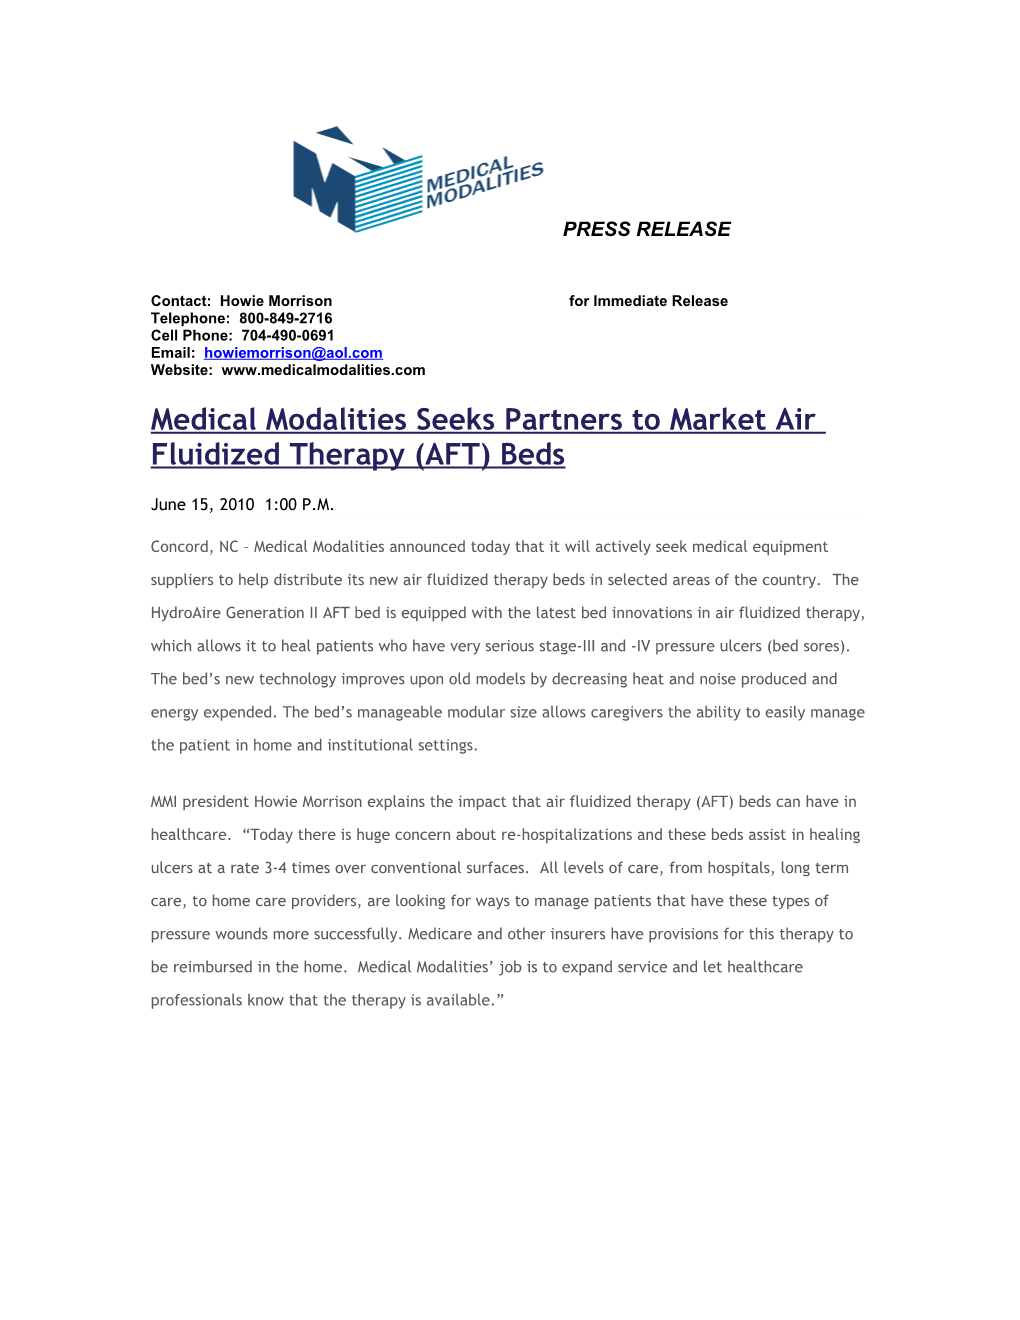 Medical Modalities Releases Second Round of Air Fluidized Therapy (AFT) Beds